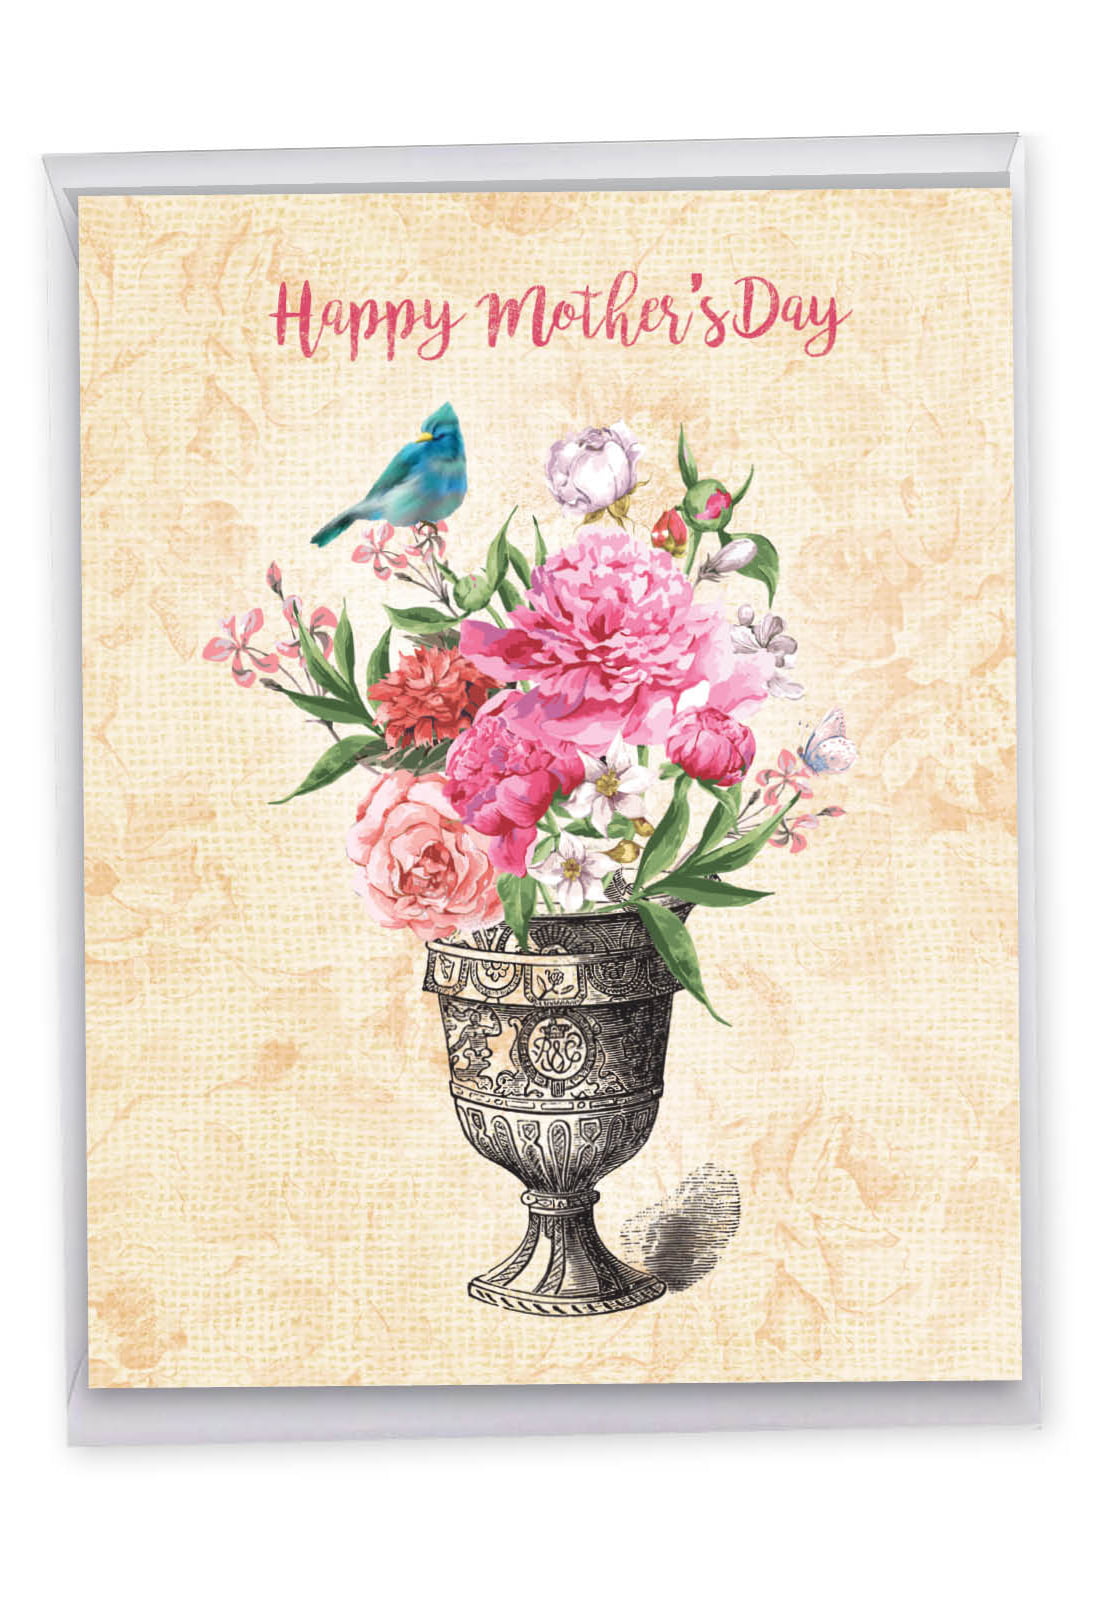 NobleWorks Jumbo Mother's Day Greeting Card 8.5 x 11 Inch with Envelope ...